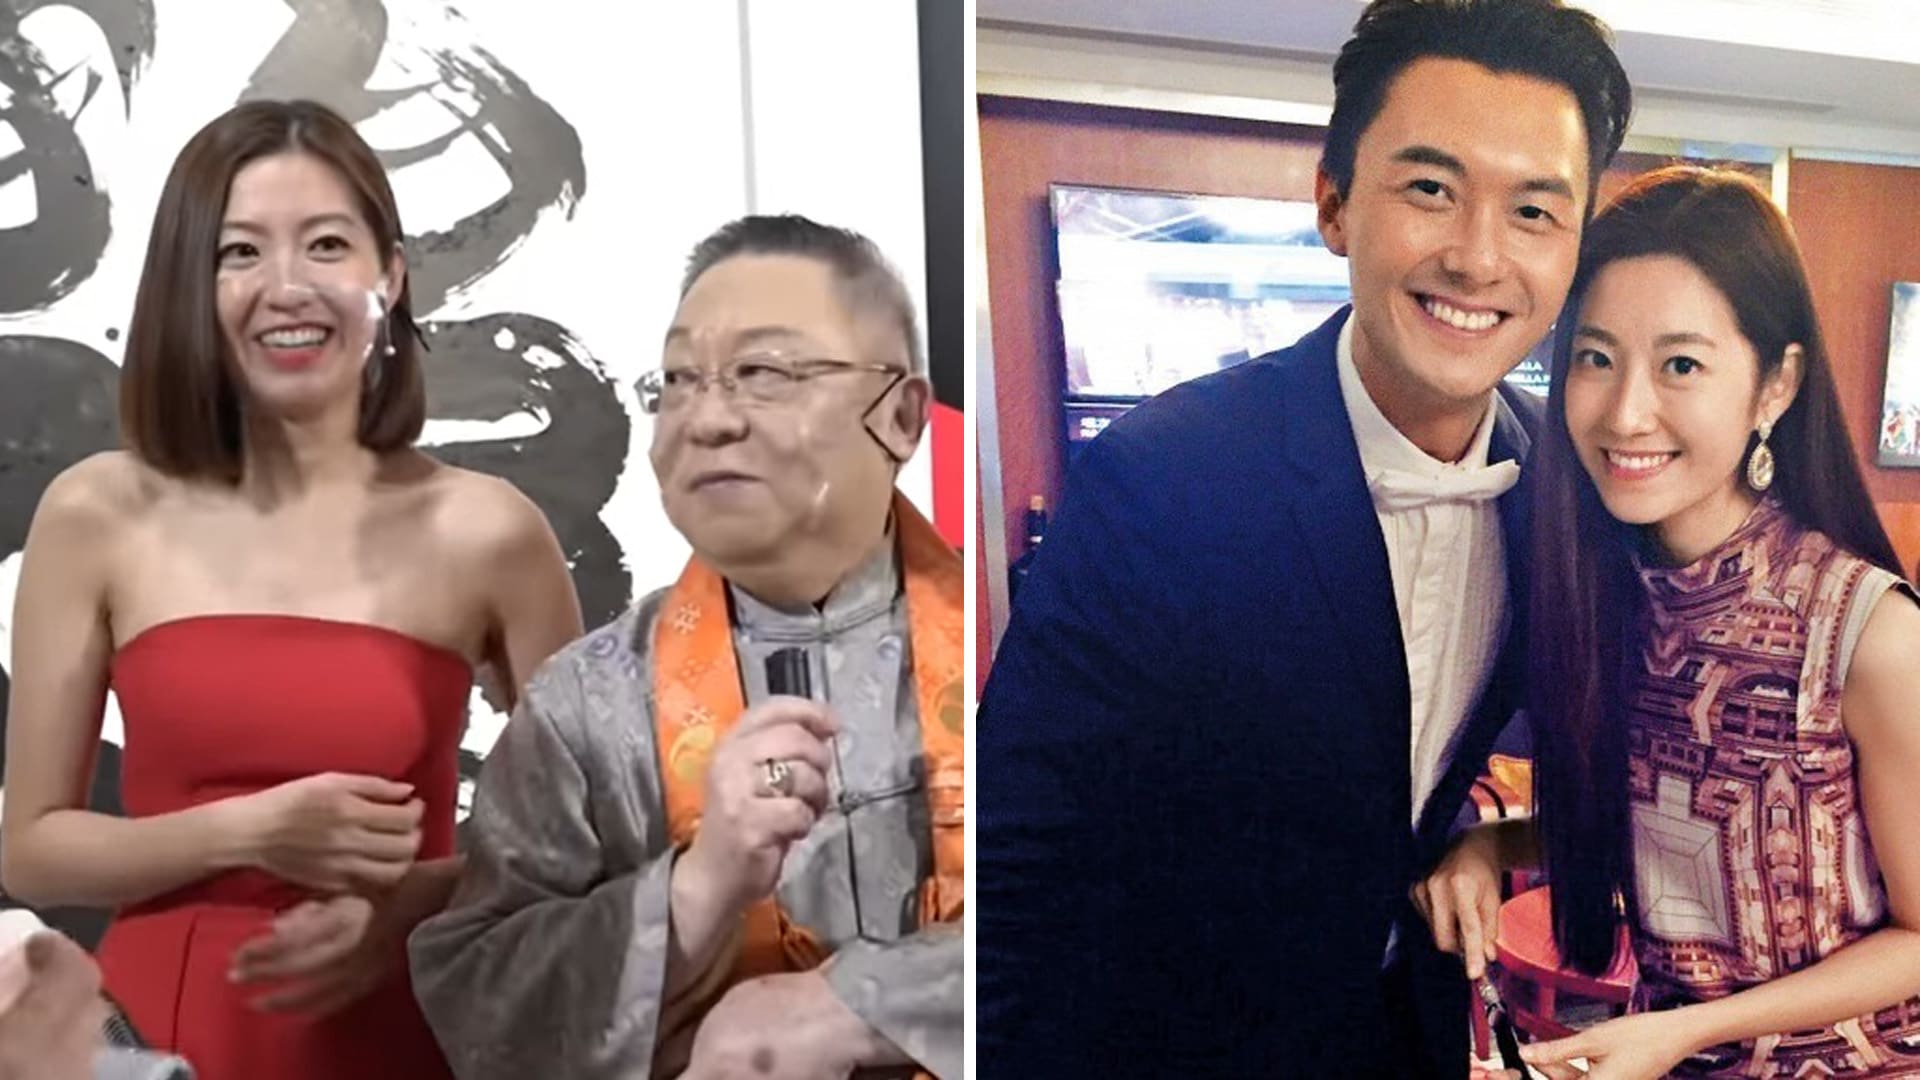 Fengshui Master Sabos Yoyo Chen, Says The TVB Star Doesn’t Want To "Reconcile" With Husband Vincent Wong